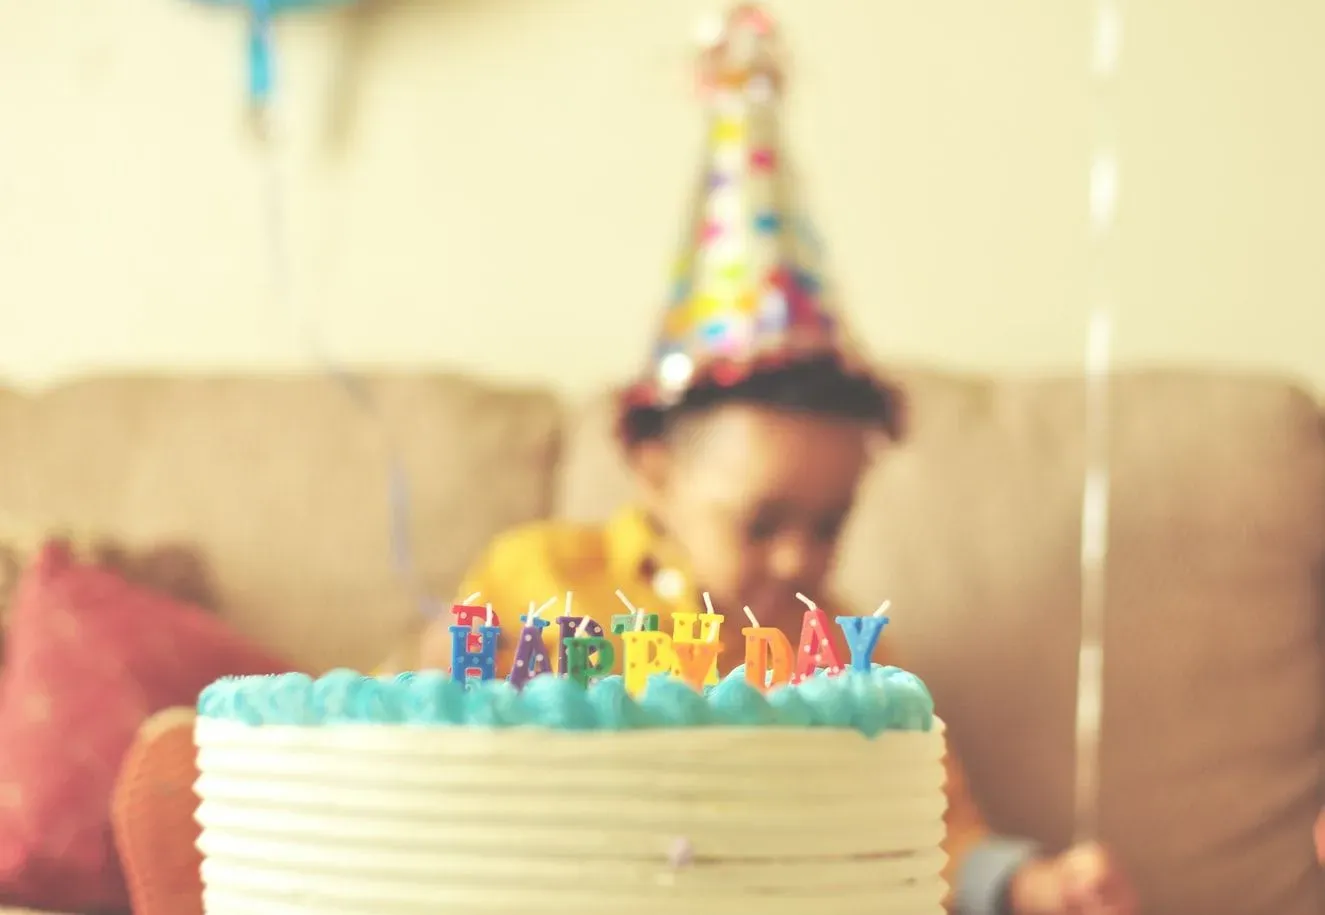 Parties are exciting for toddlers, and these ideas for birthday parties make it easy to have a great time